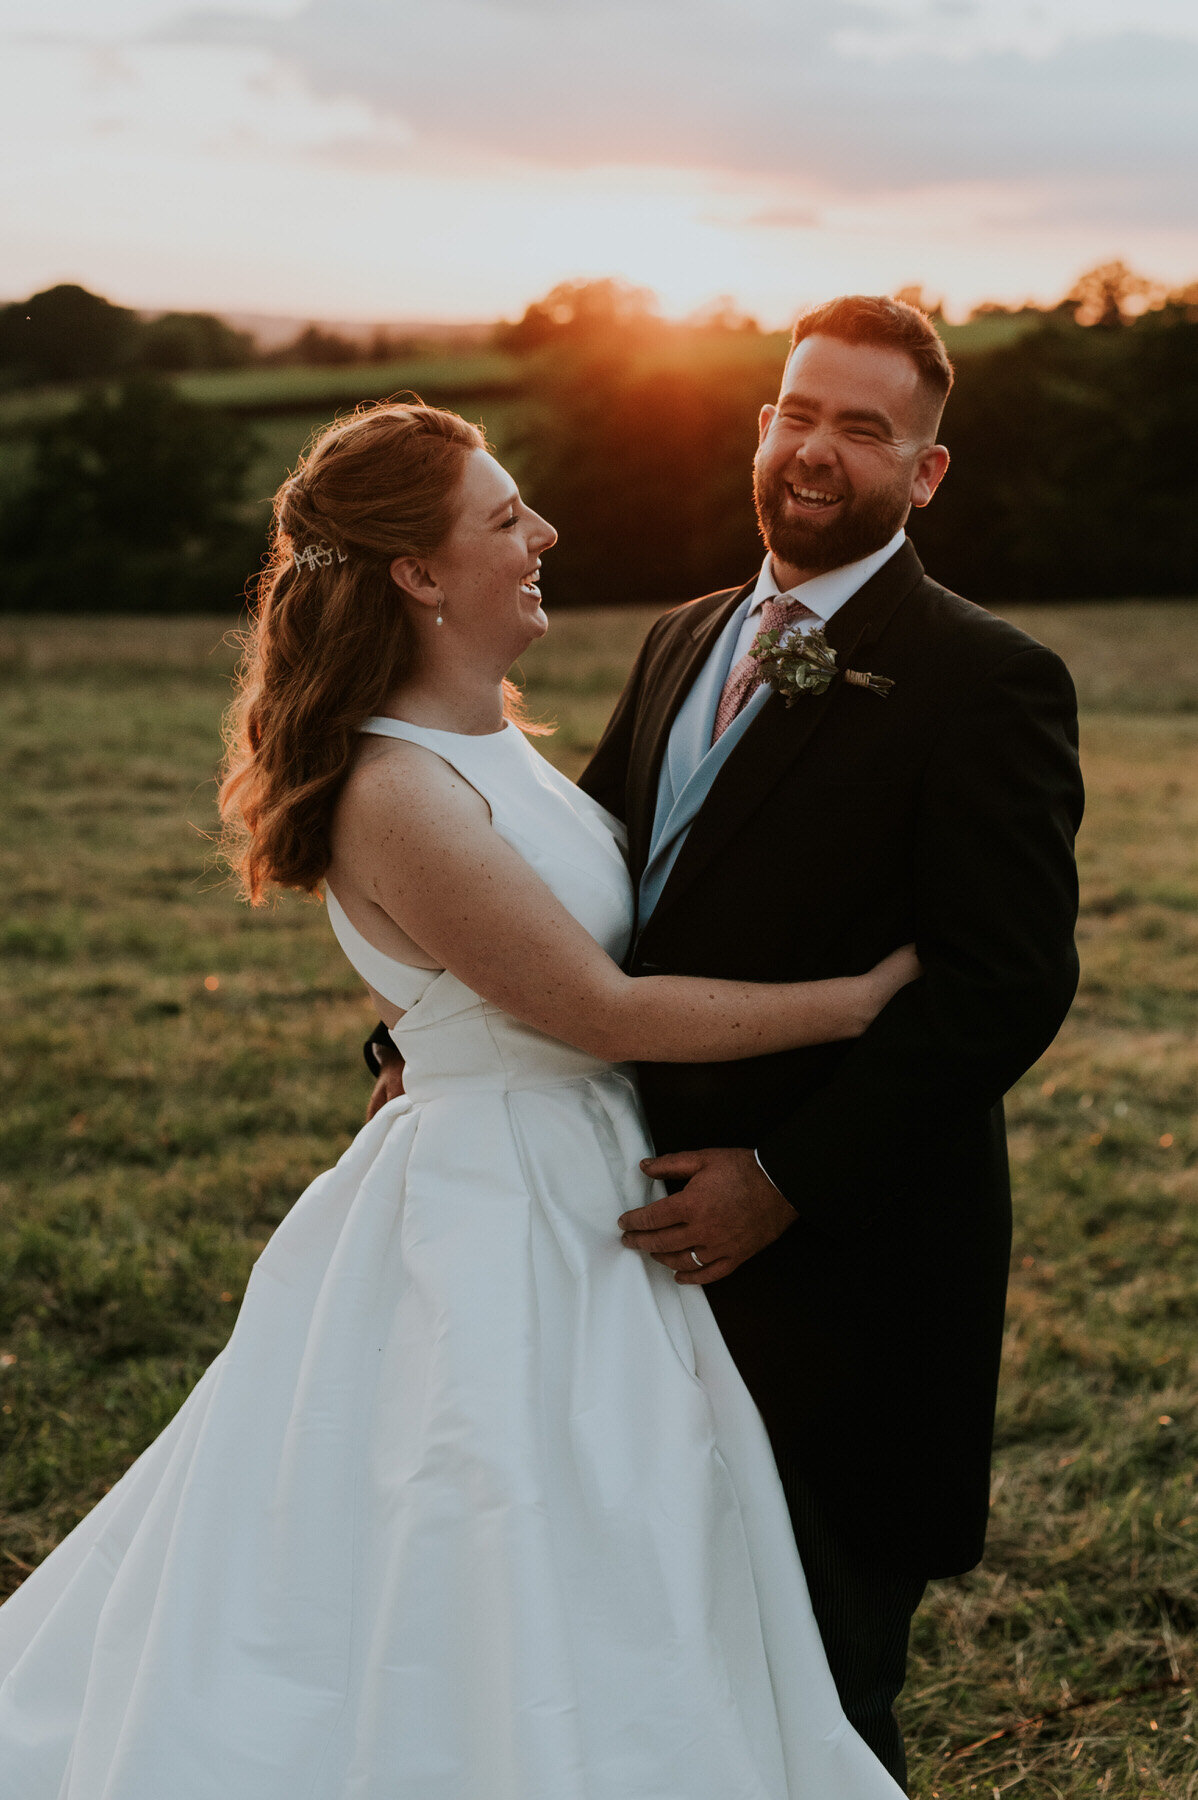 Bride and groom laughing in a field at golden hour